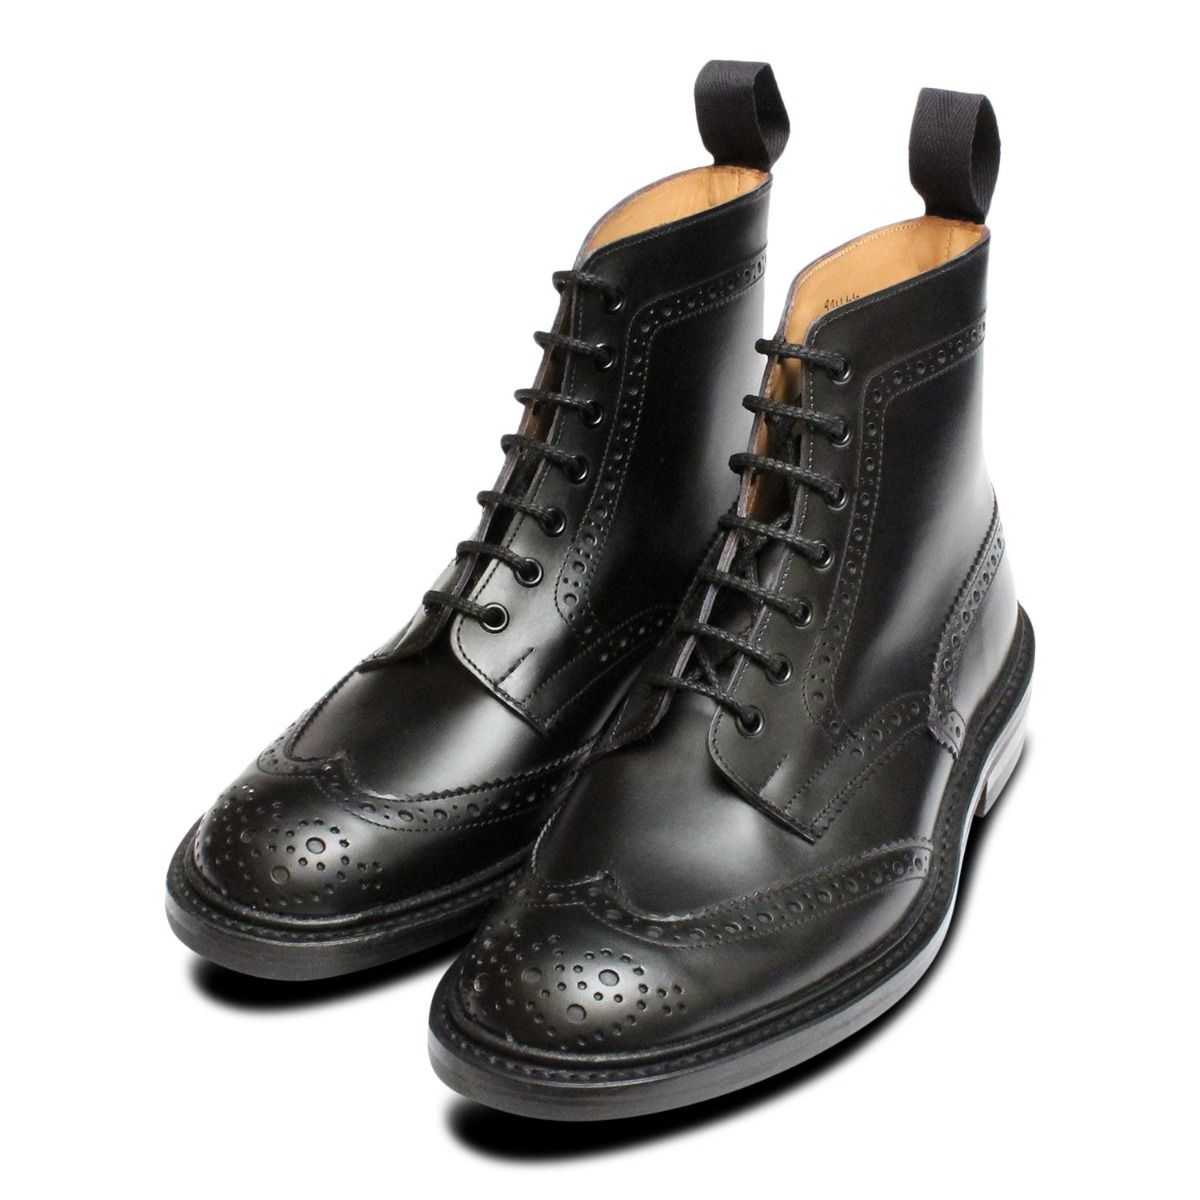 Trickers Stow Black Dainite Brogue Boots